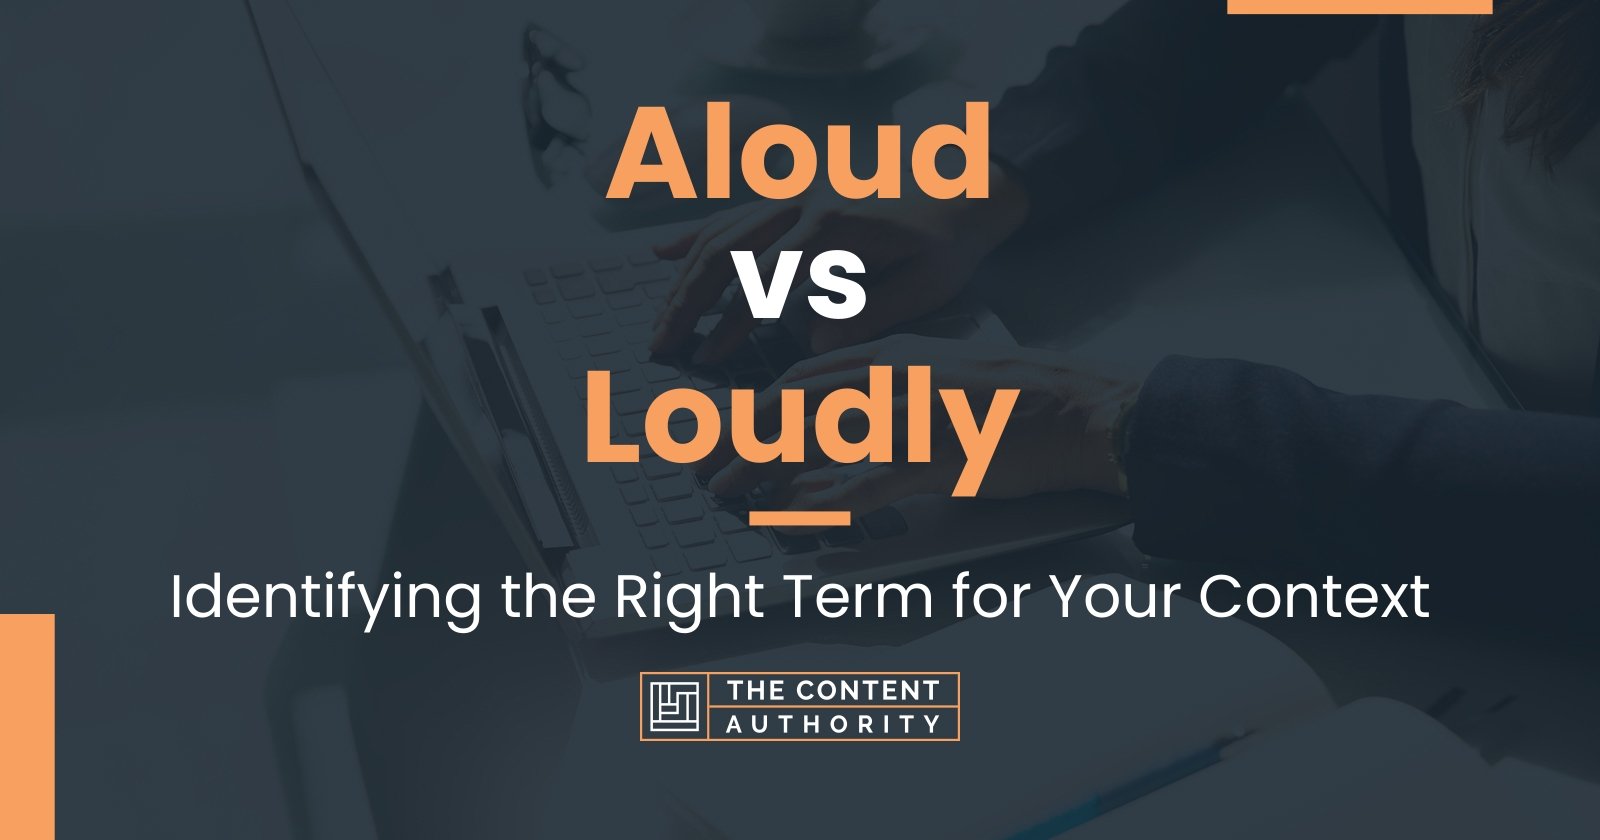 Aloud vs Loudly: Identifying the Right Term for Your Context